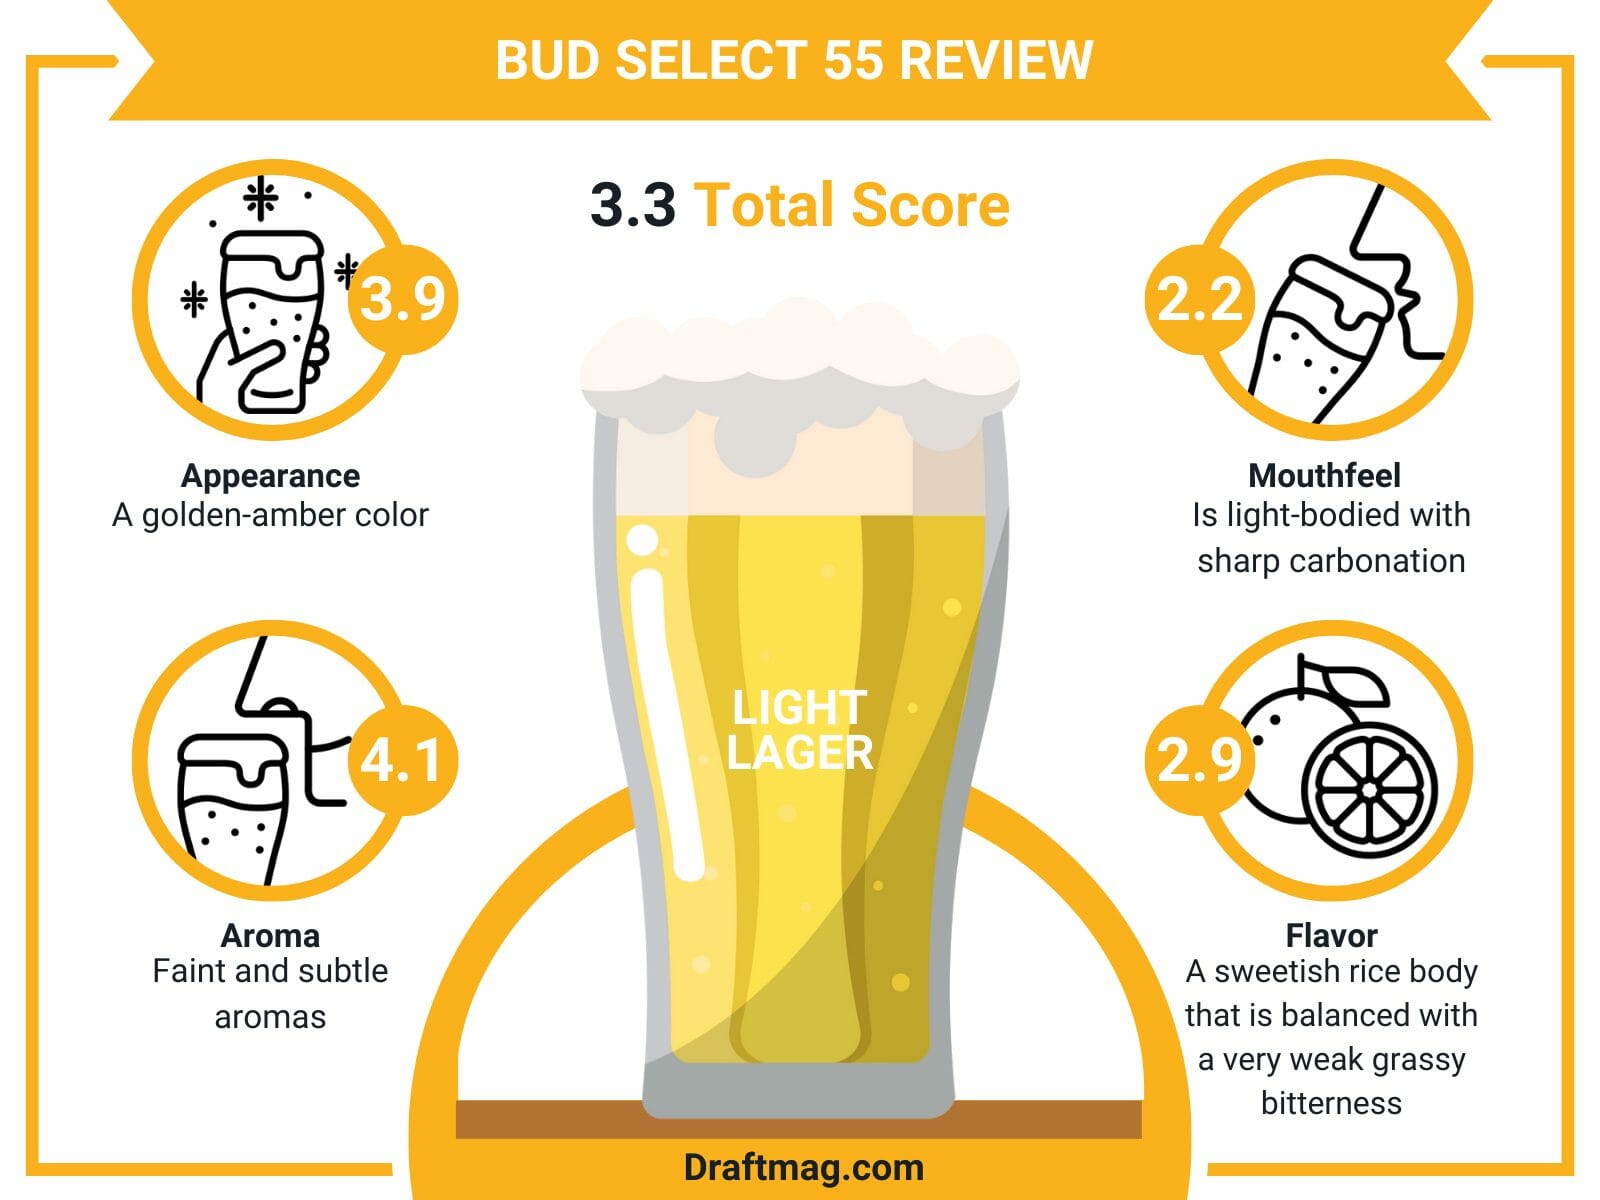 Bud select review infographic